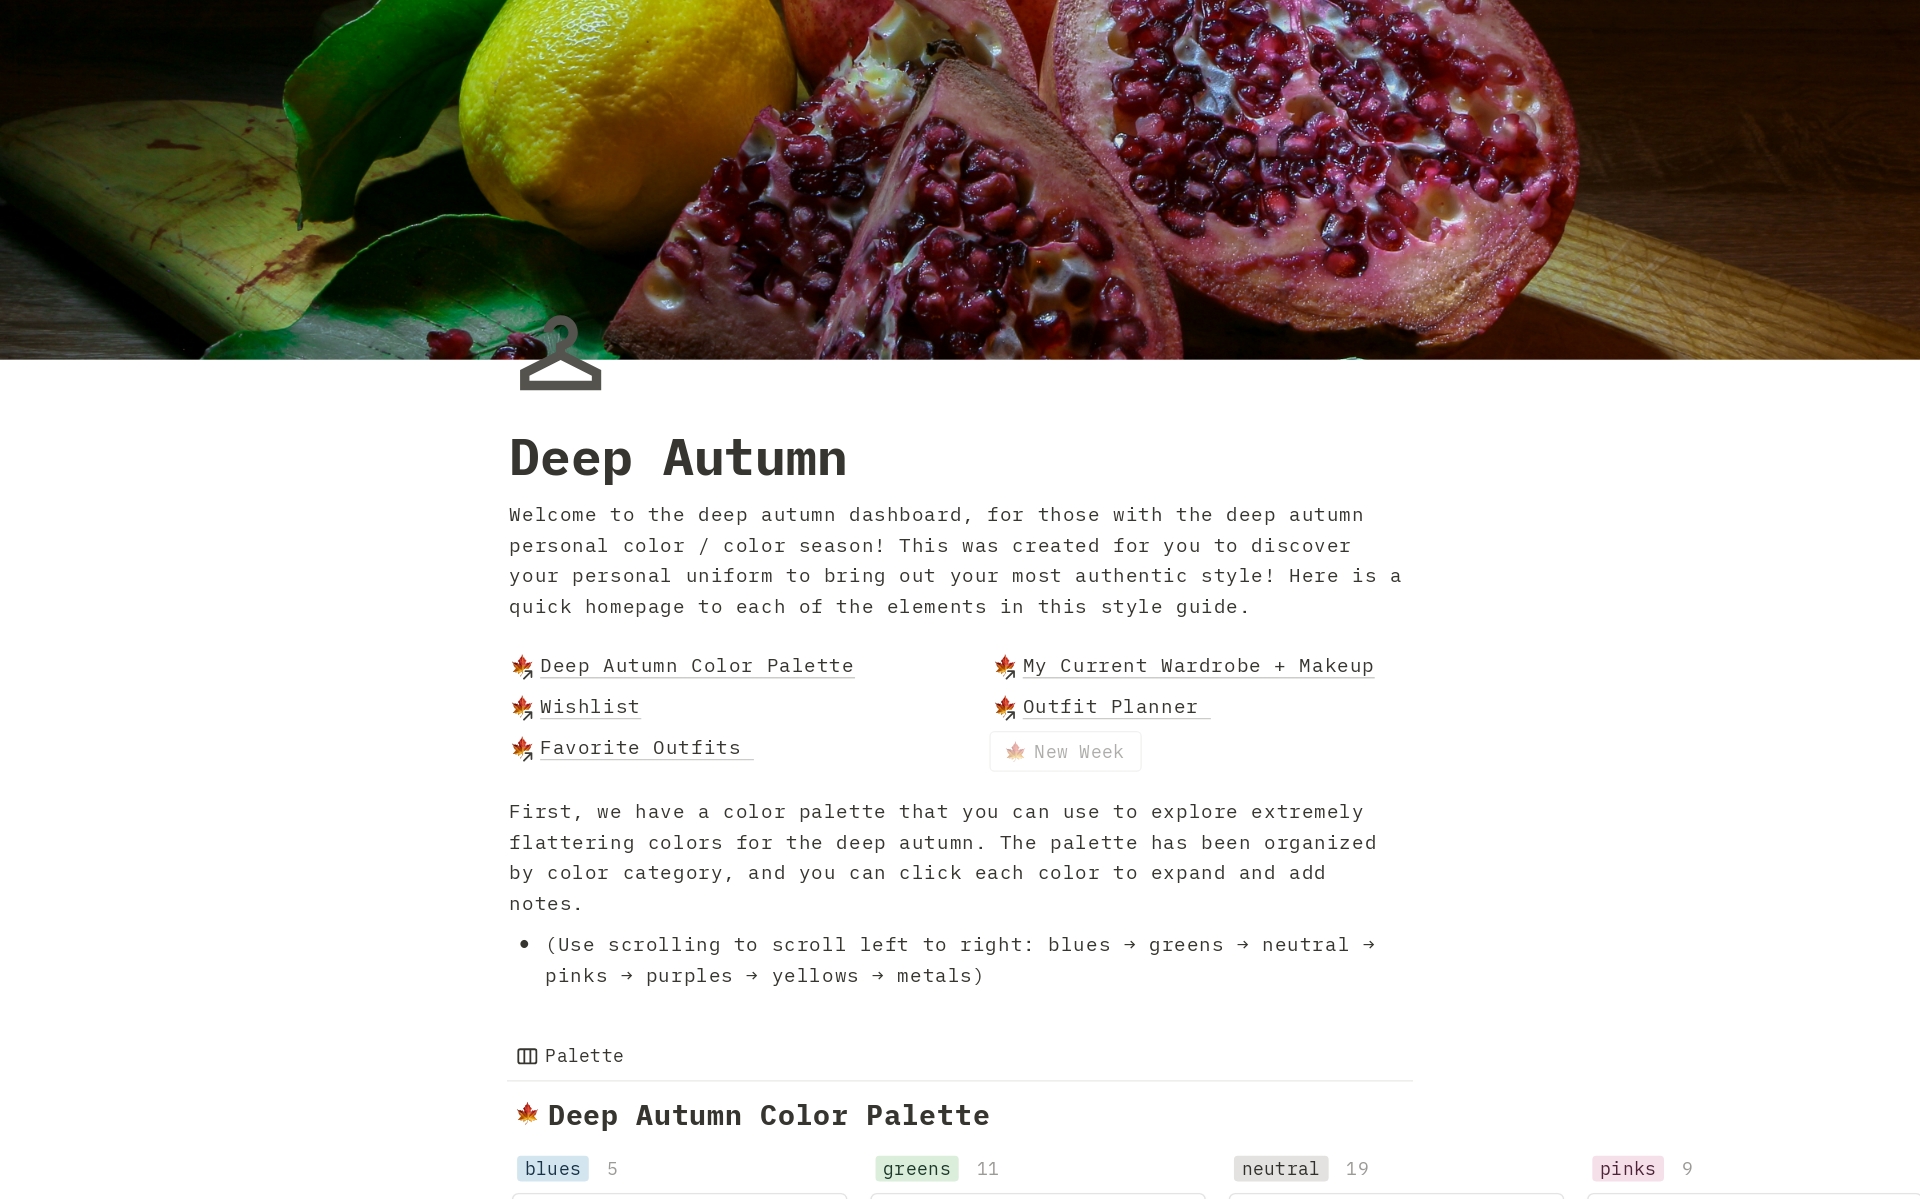 Are you a deep autumn according to seasonal color analysis? Revolutionize your style with this customizable seasonal color style guide: organize your wardrobe, makeup, and wishlist to align with your most flattering colors.